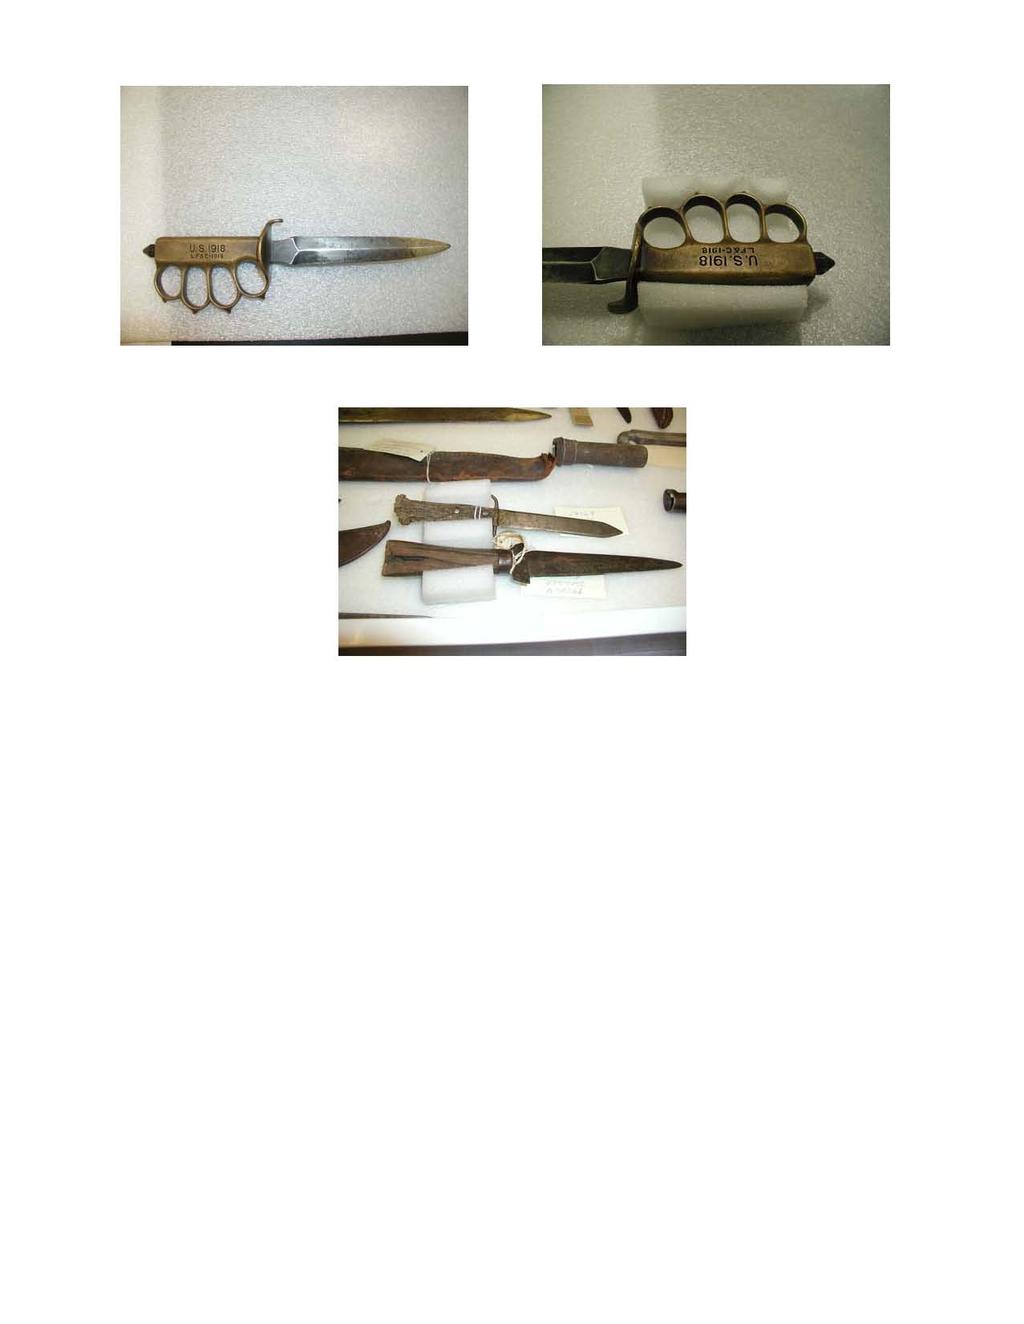 Figure 6. Overall view of a smaller object requiring an individual mount. Figure 7. Custom Ethafoam mount for the dagger handle. Figure 8. Detail of supports within the drawer for Smaller objects.